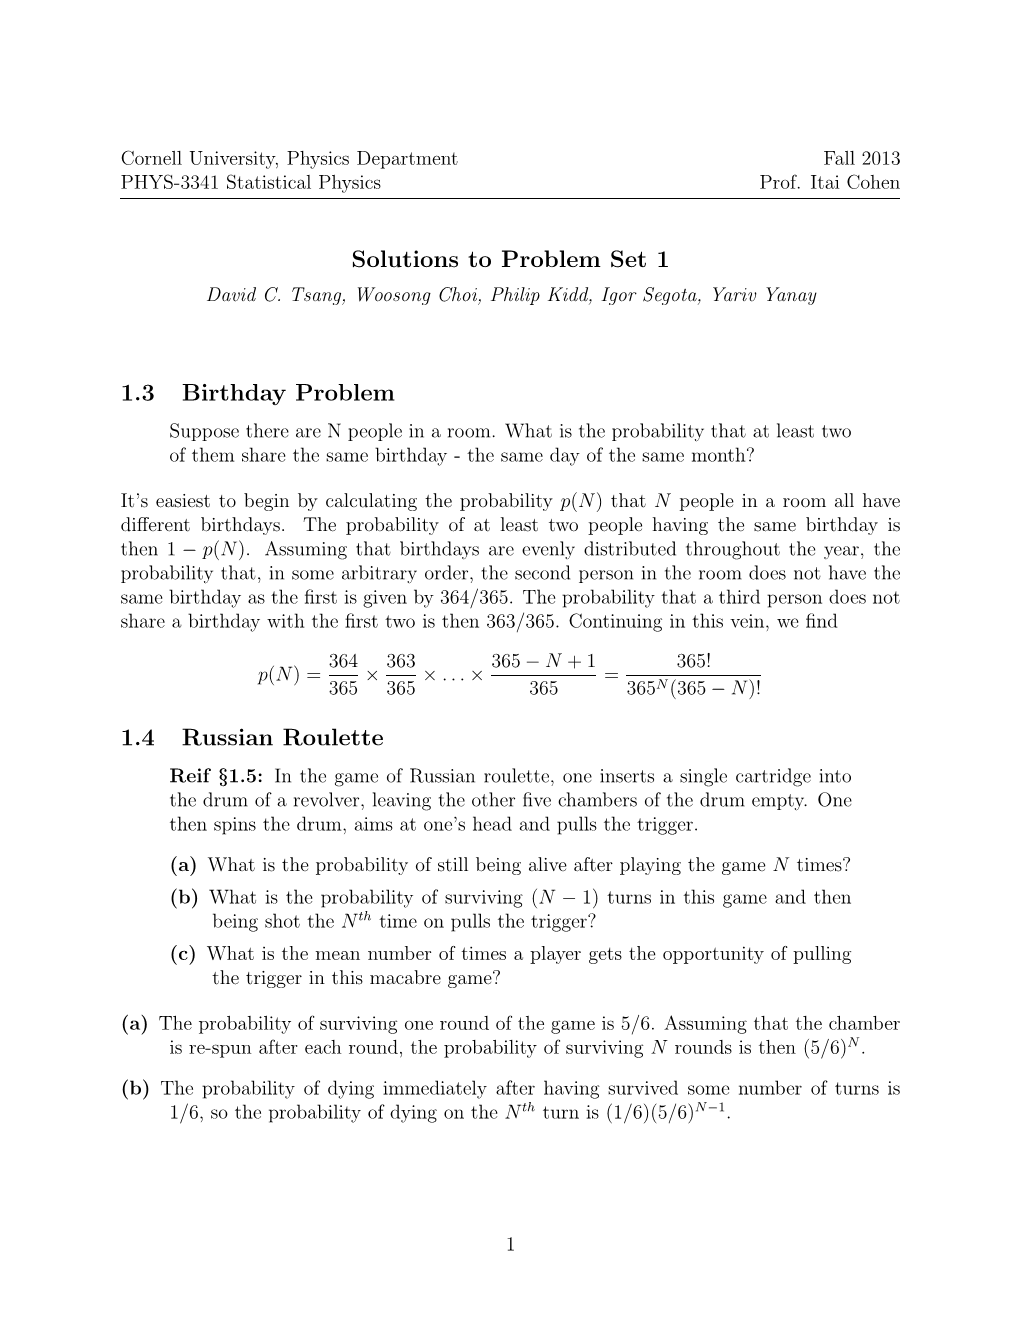 Solutions to Problem Set 1 1.3 Birthday Problem 1.4 Russian